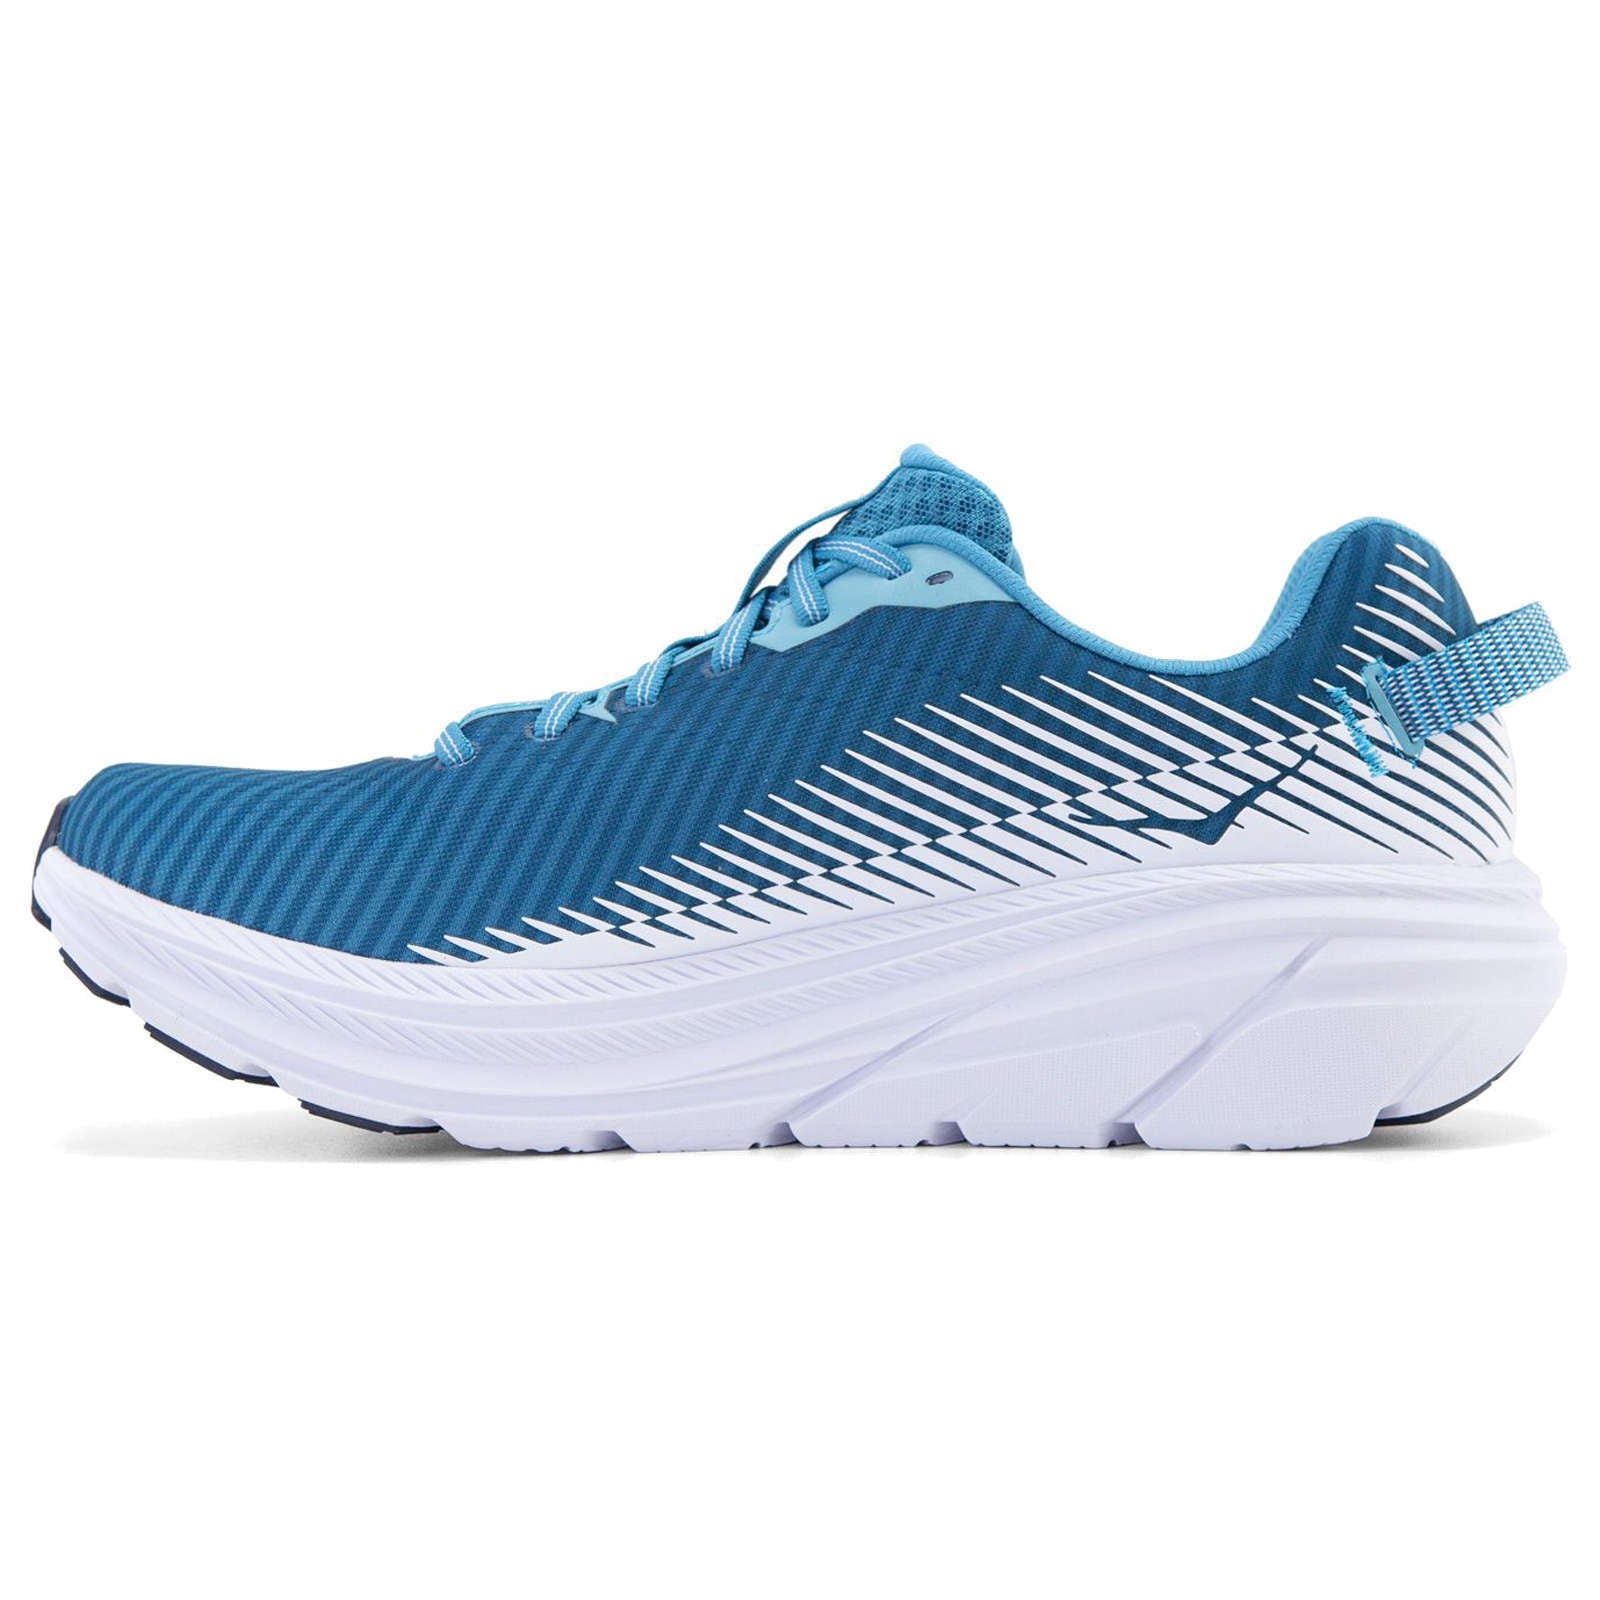 Hoka One One Rincon 2 Mesh Men's Low-Top Road Running Trainers#color_blue moon white